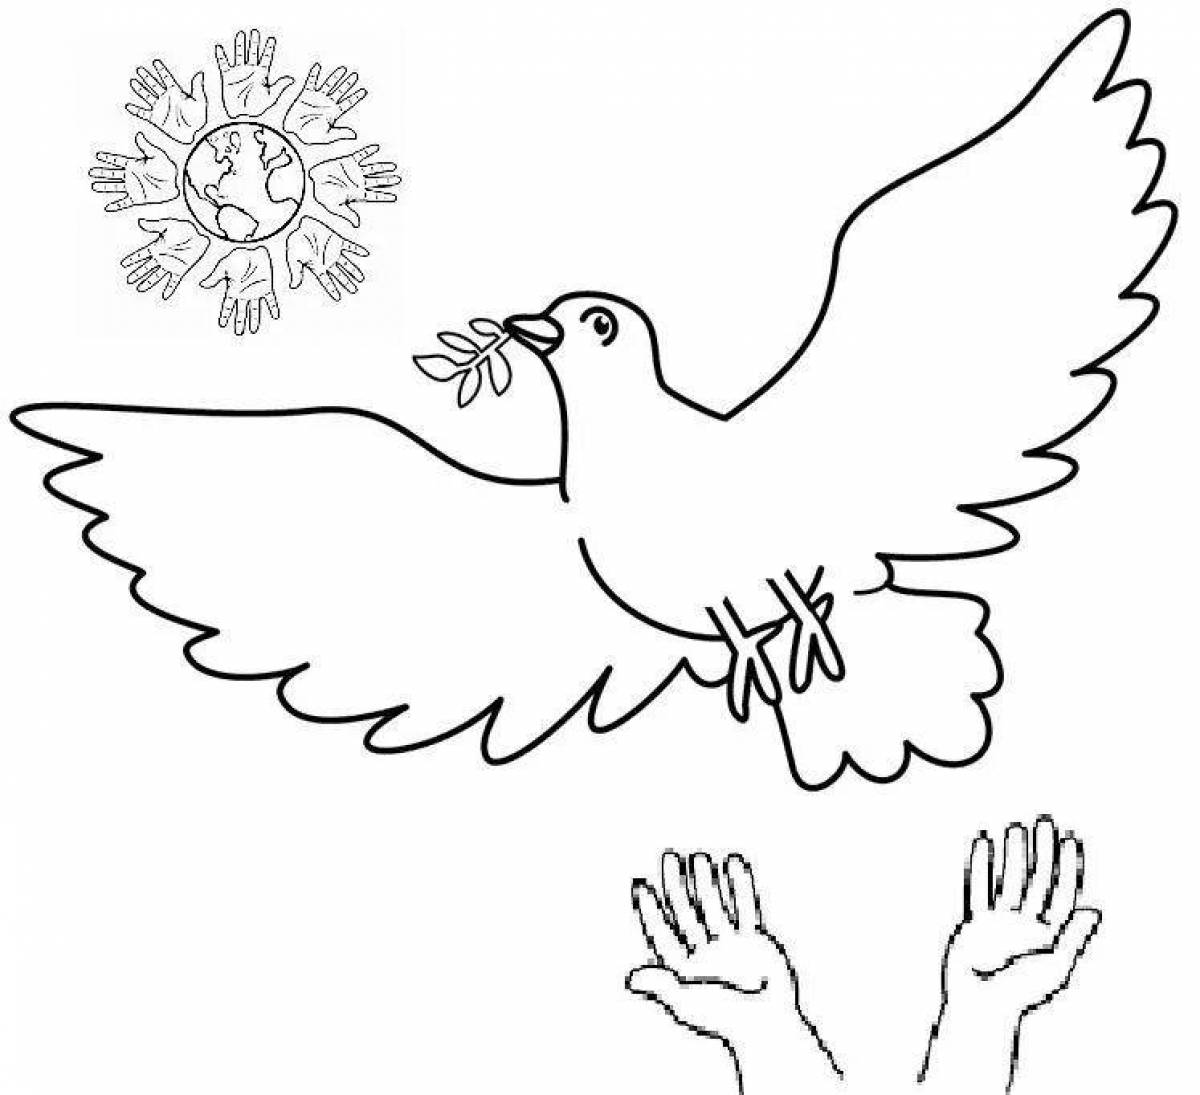 Pretty no war coloring page for kids